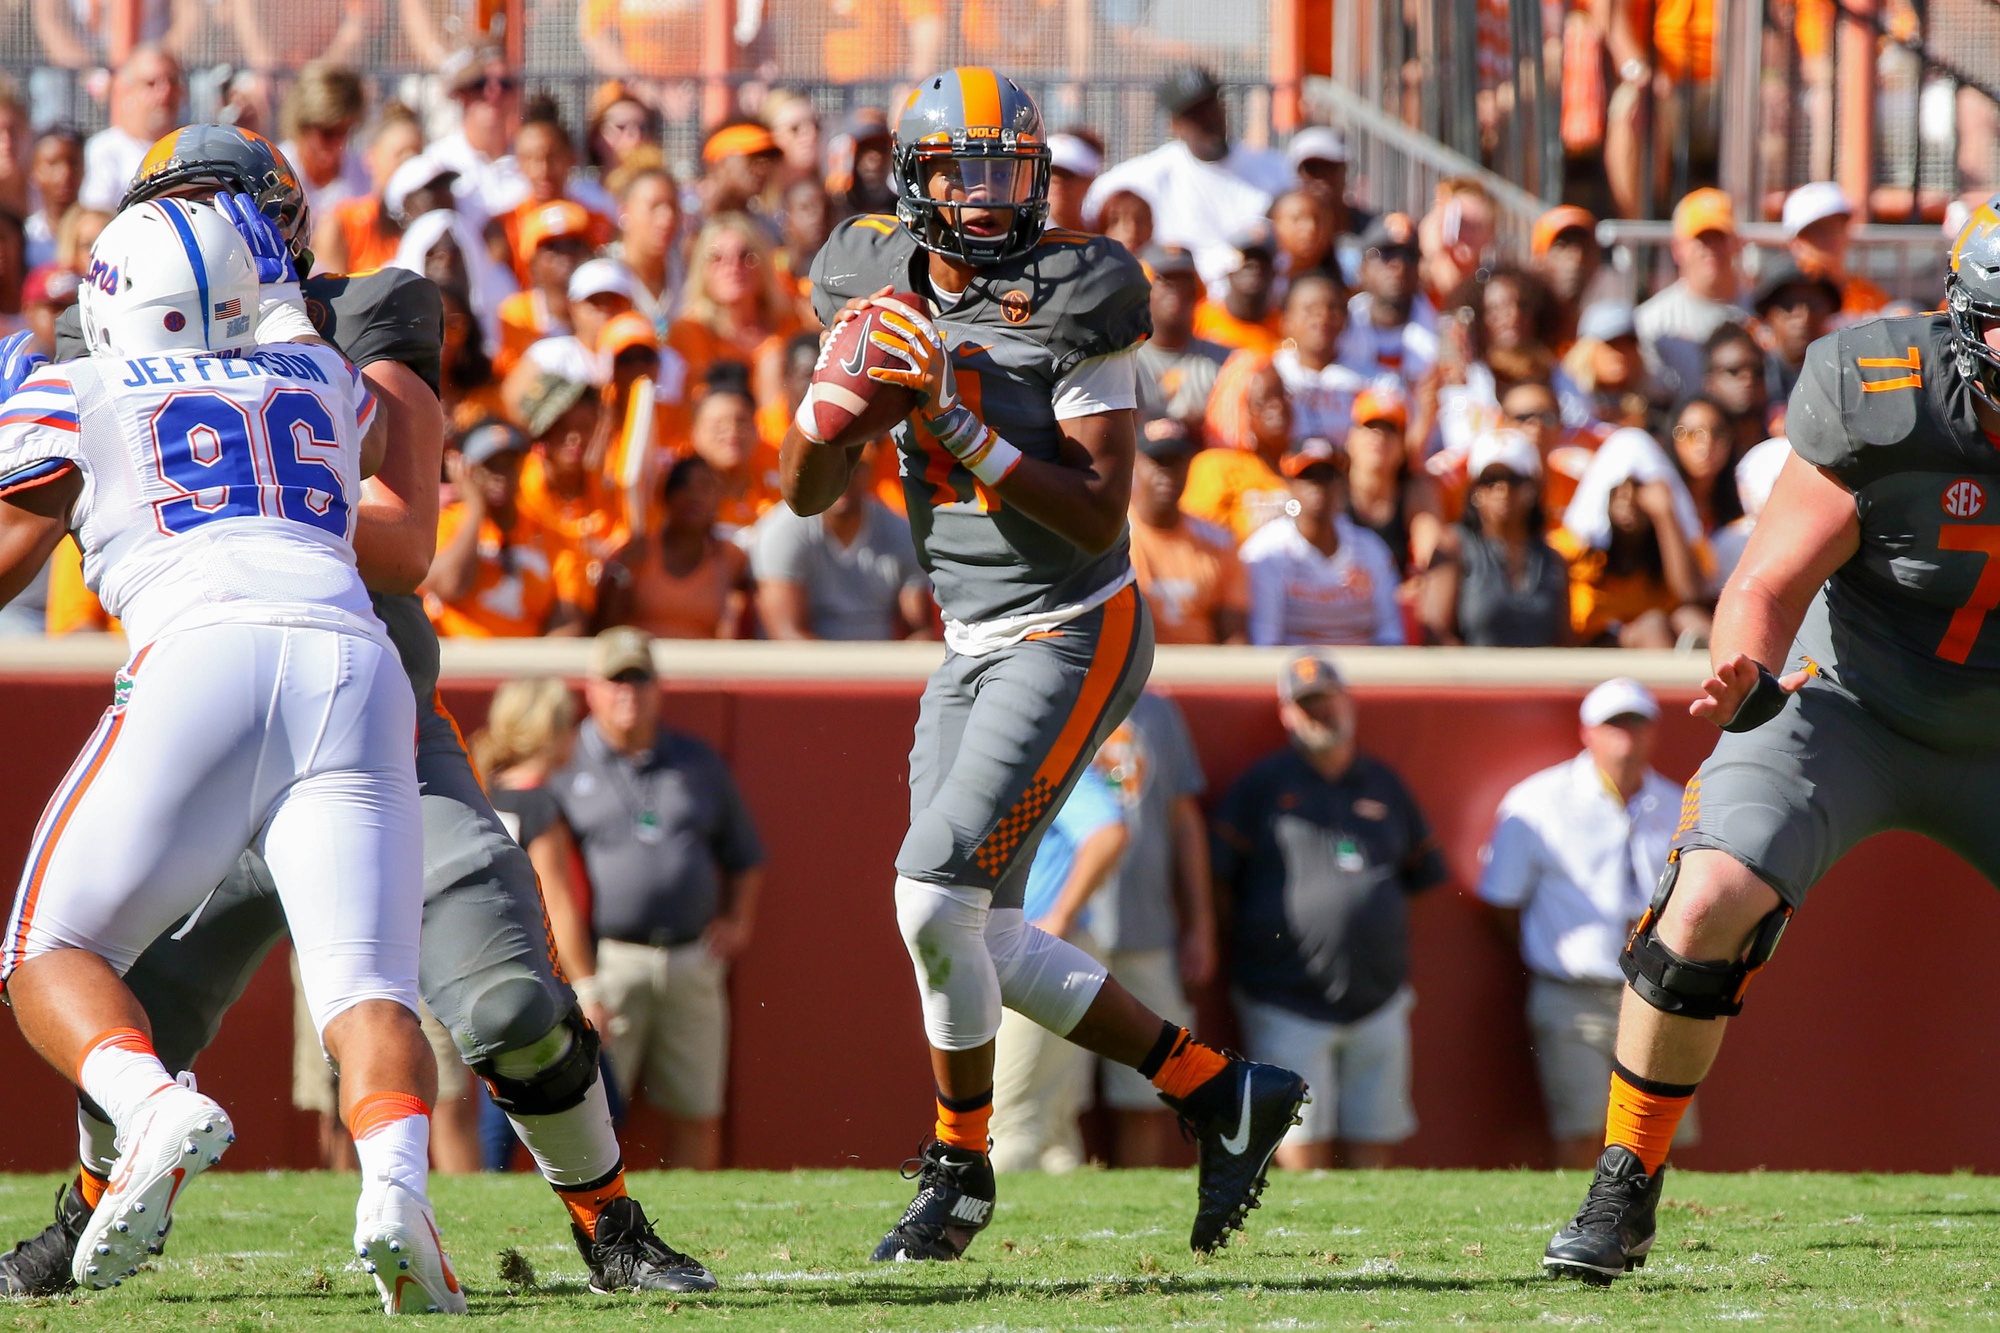 Sep 24, 2016; Knoxville, TN, USA; Tennessee Volunteers quarterback Joshua Dobbs (11) drops back to pass the ball against the Florida Gators during the first quarter at Neyland Stadium. Mandatory Credit: Randy Sartin-USA TODAY Sports